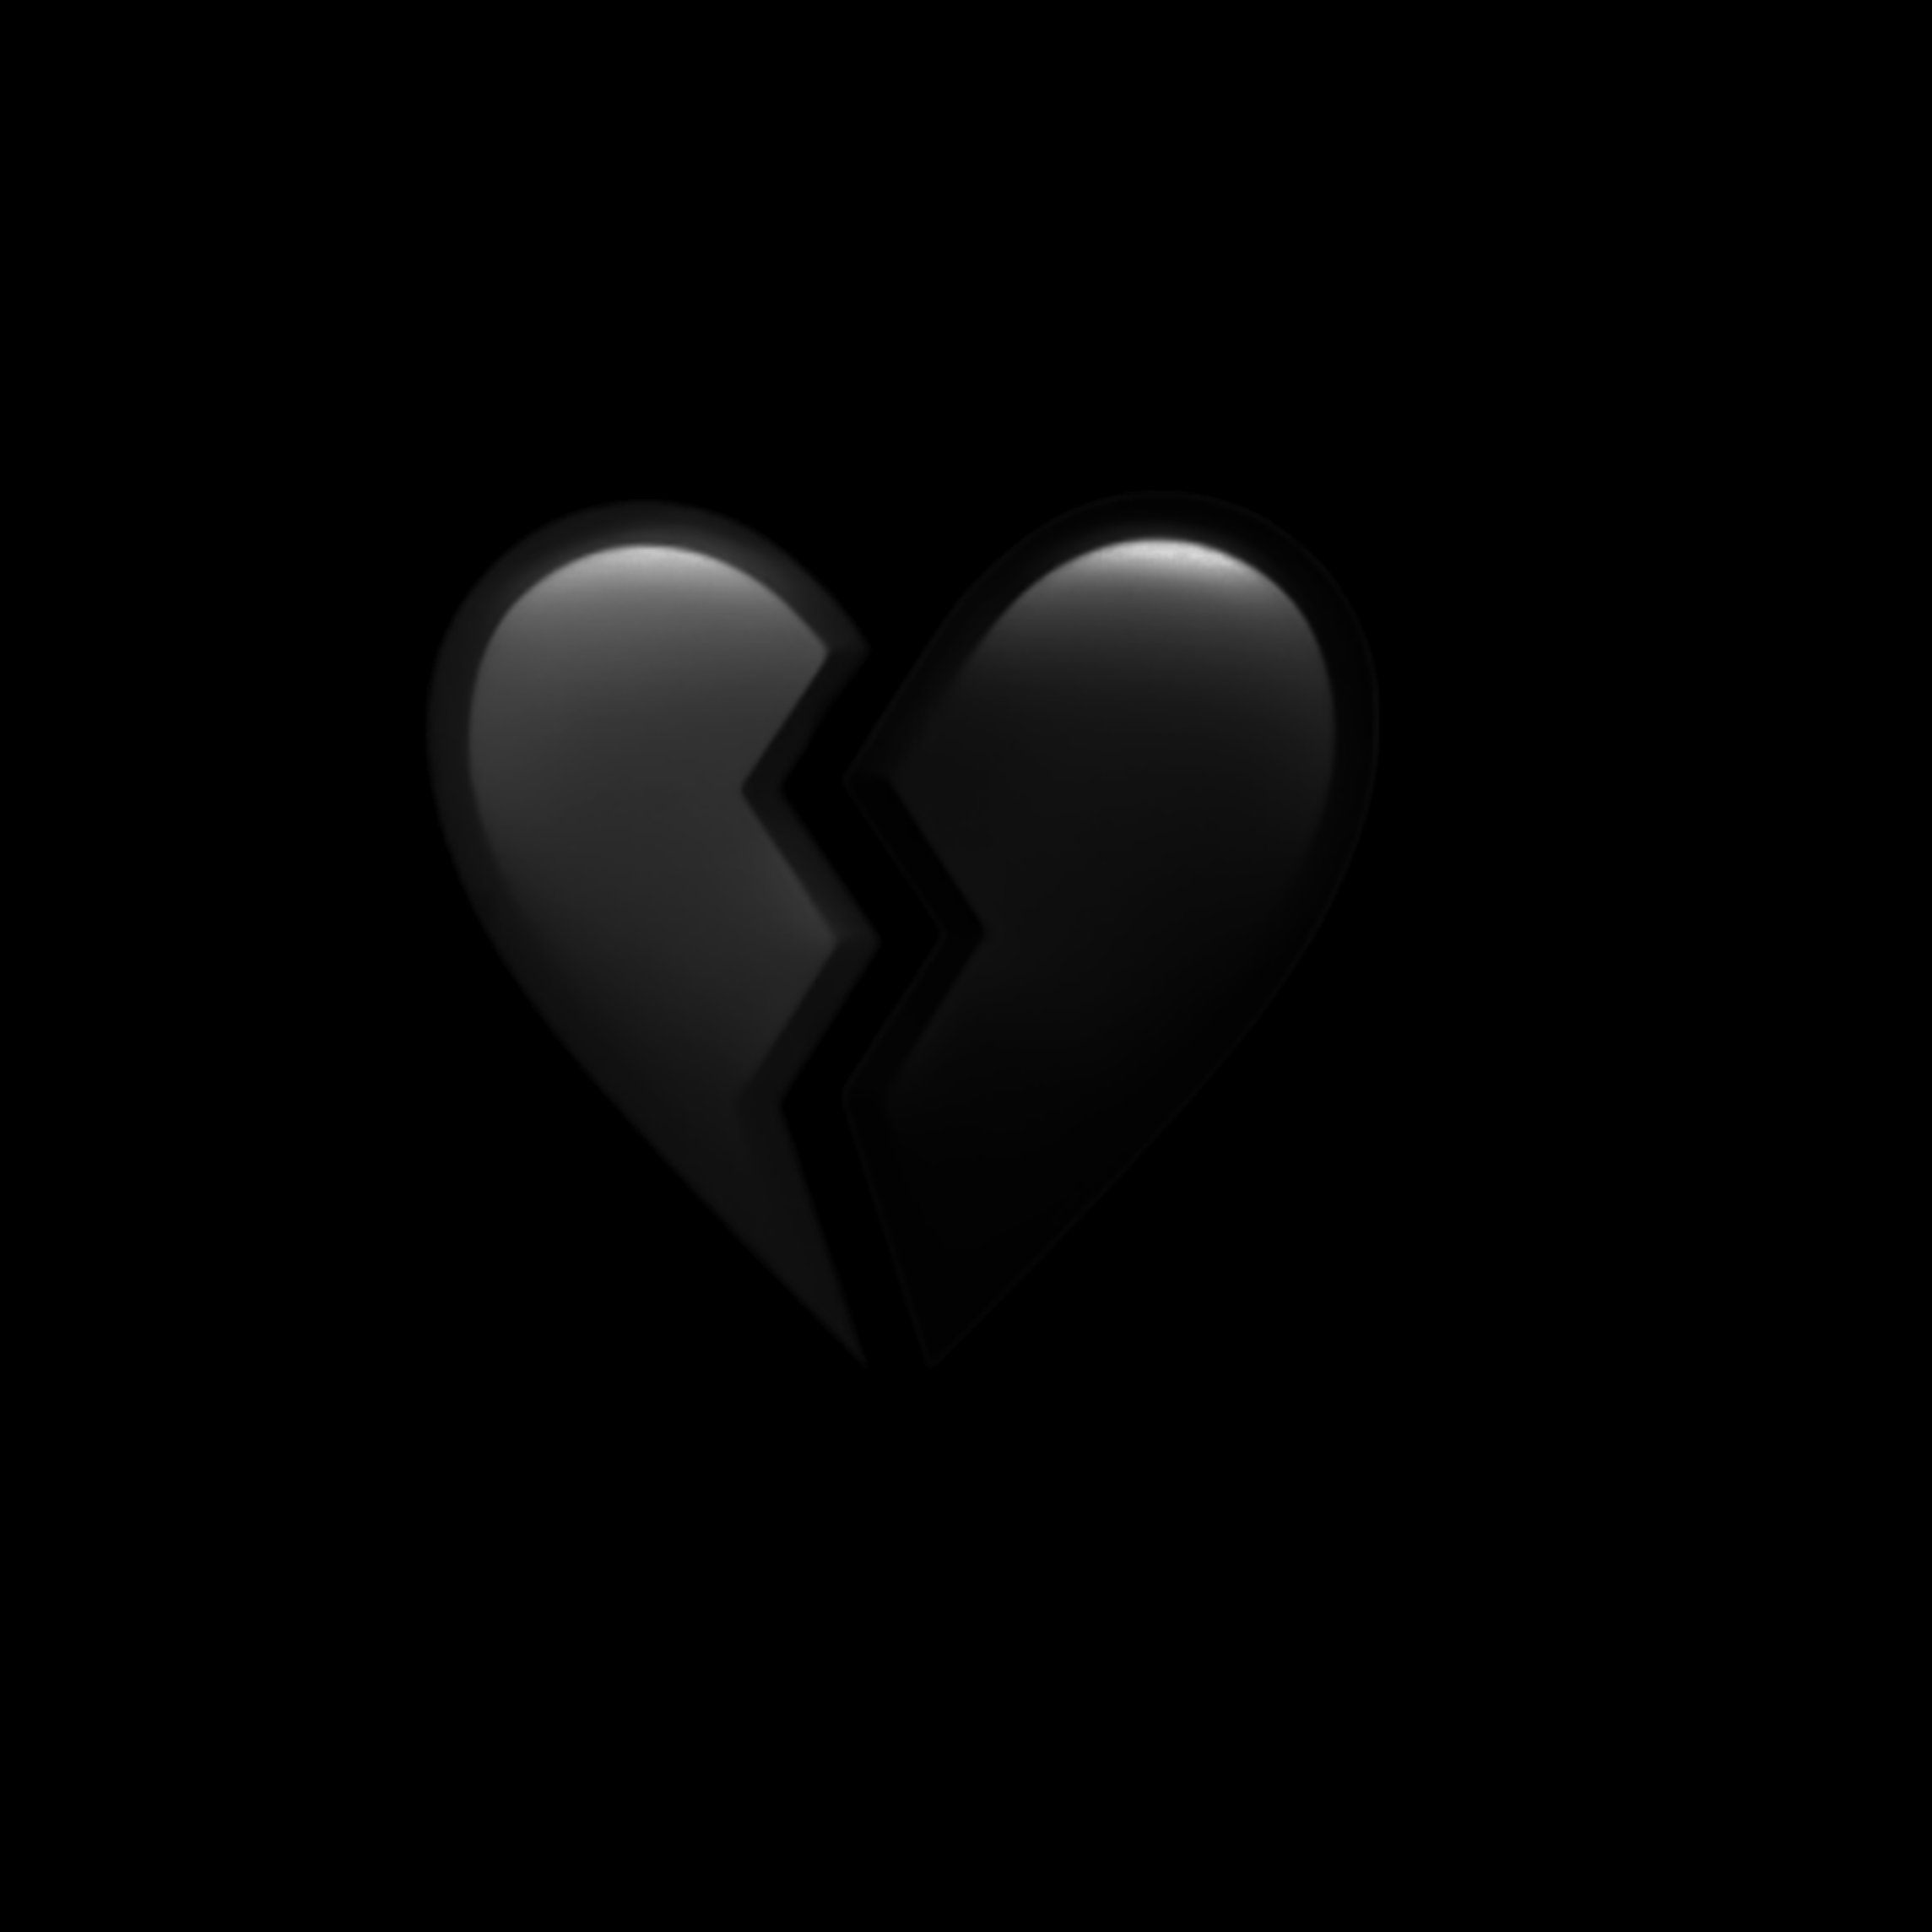 Broken Heart Black And White Wallpapers